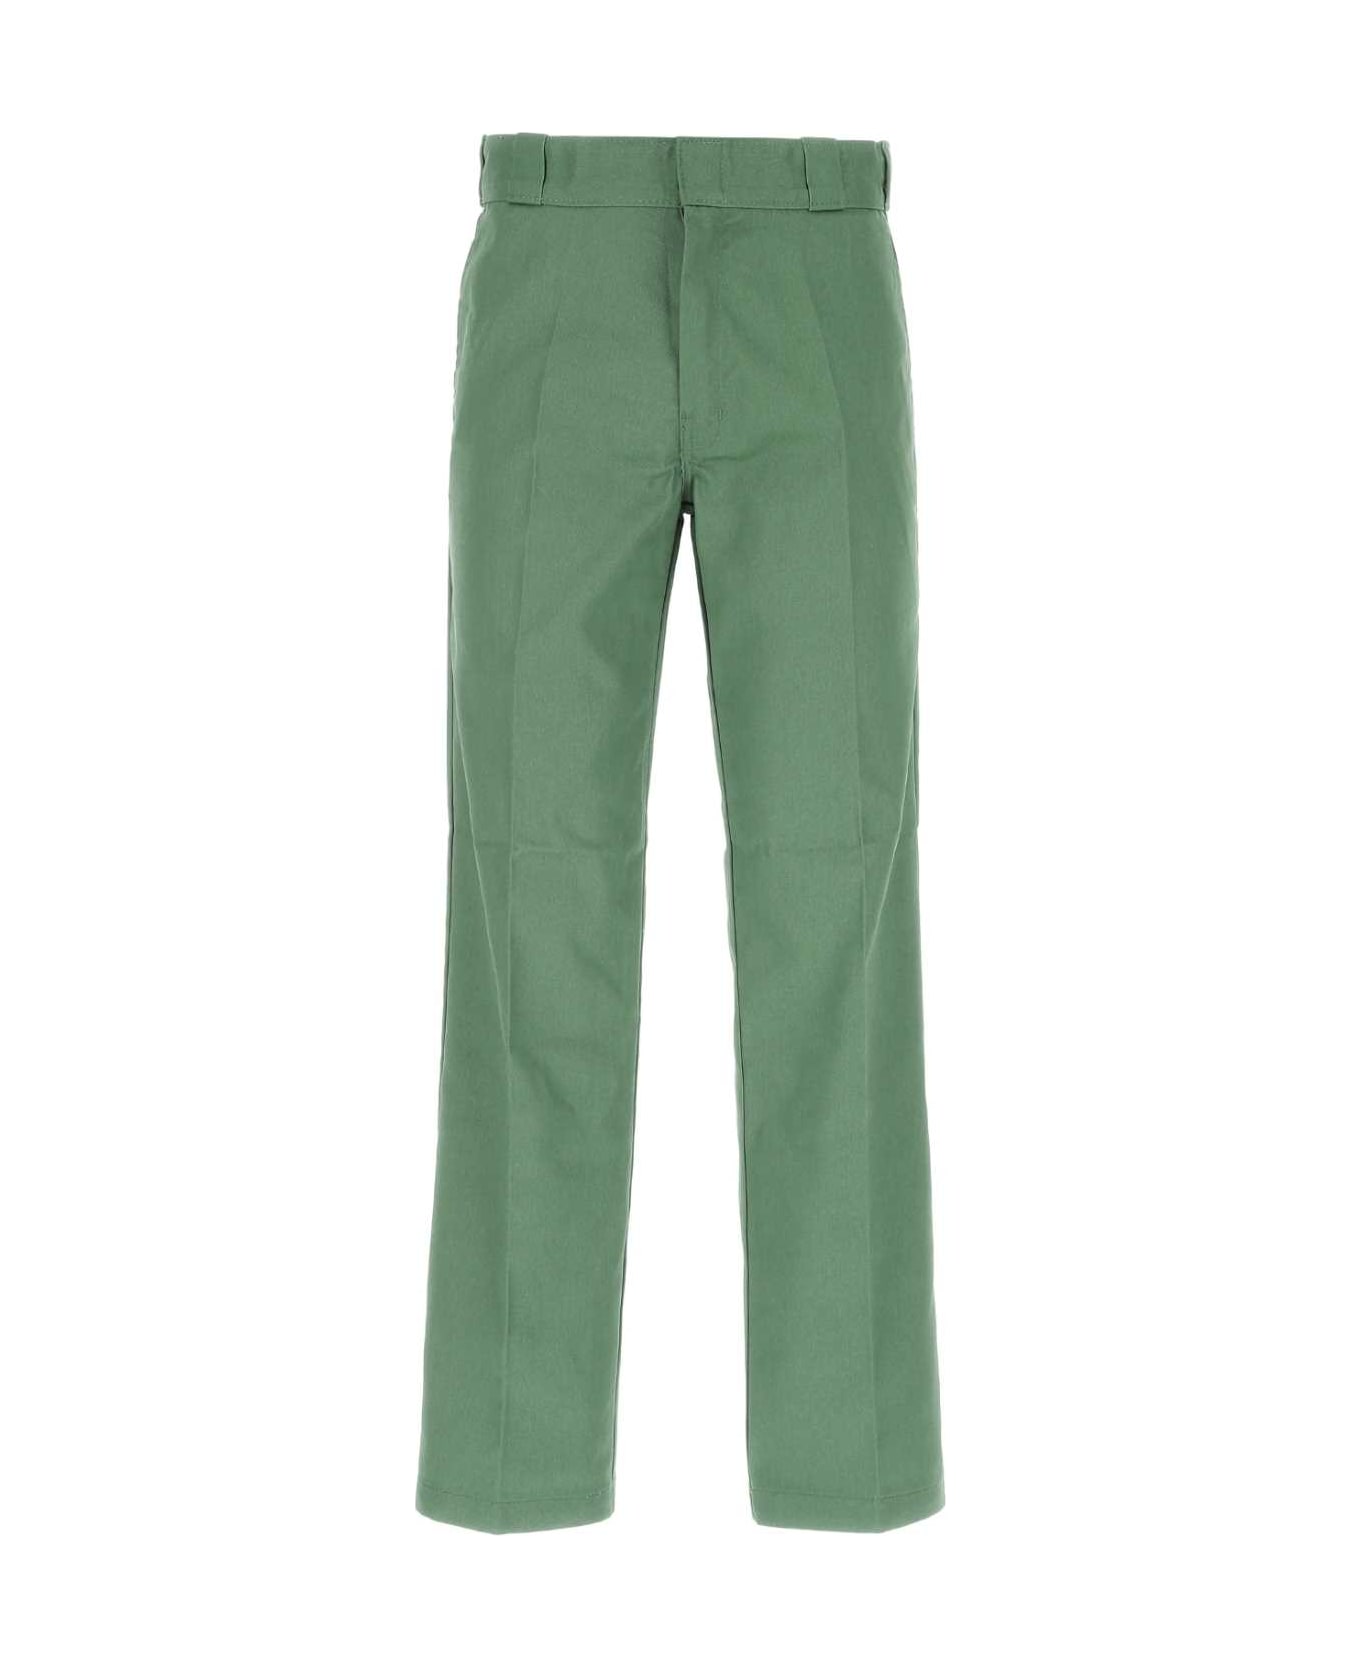 Dickies Green Polyester Blend Pant - C971 ボトムス